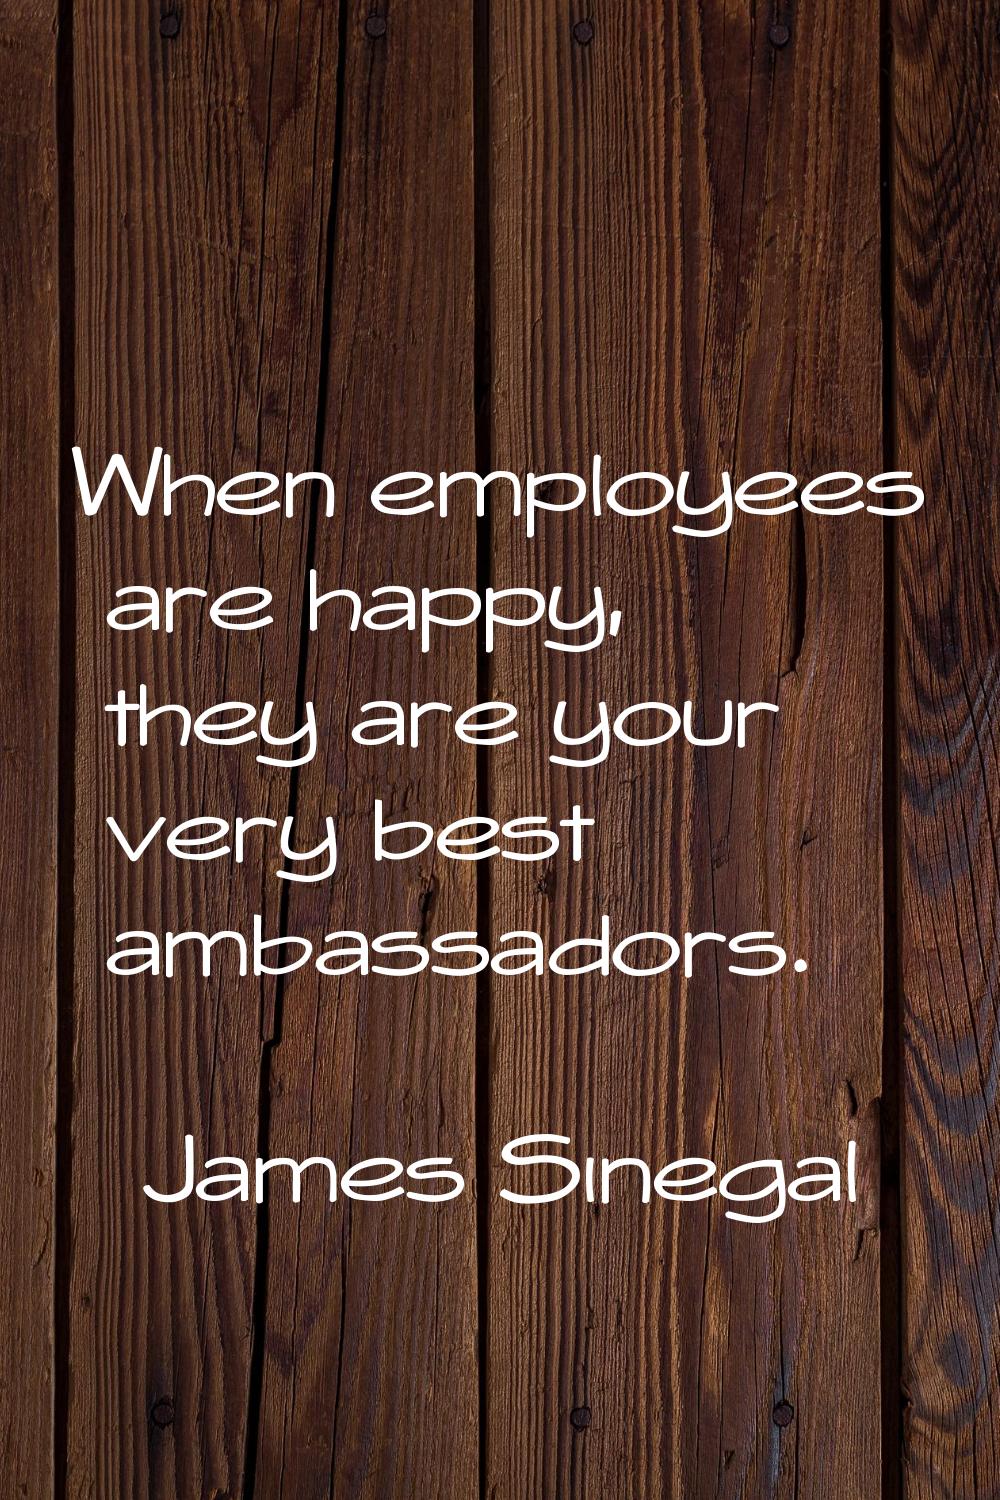 When employees are happy, they are your very best ambassadors.